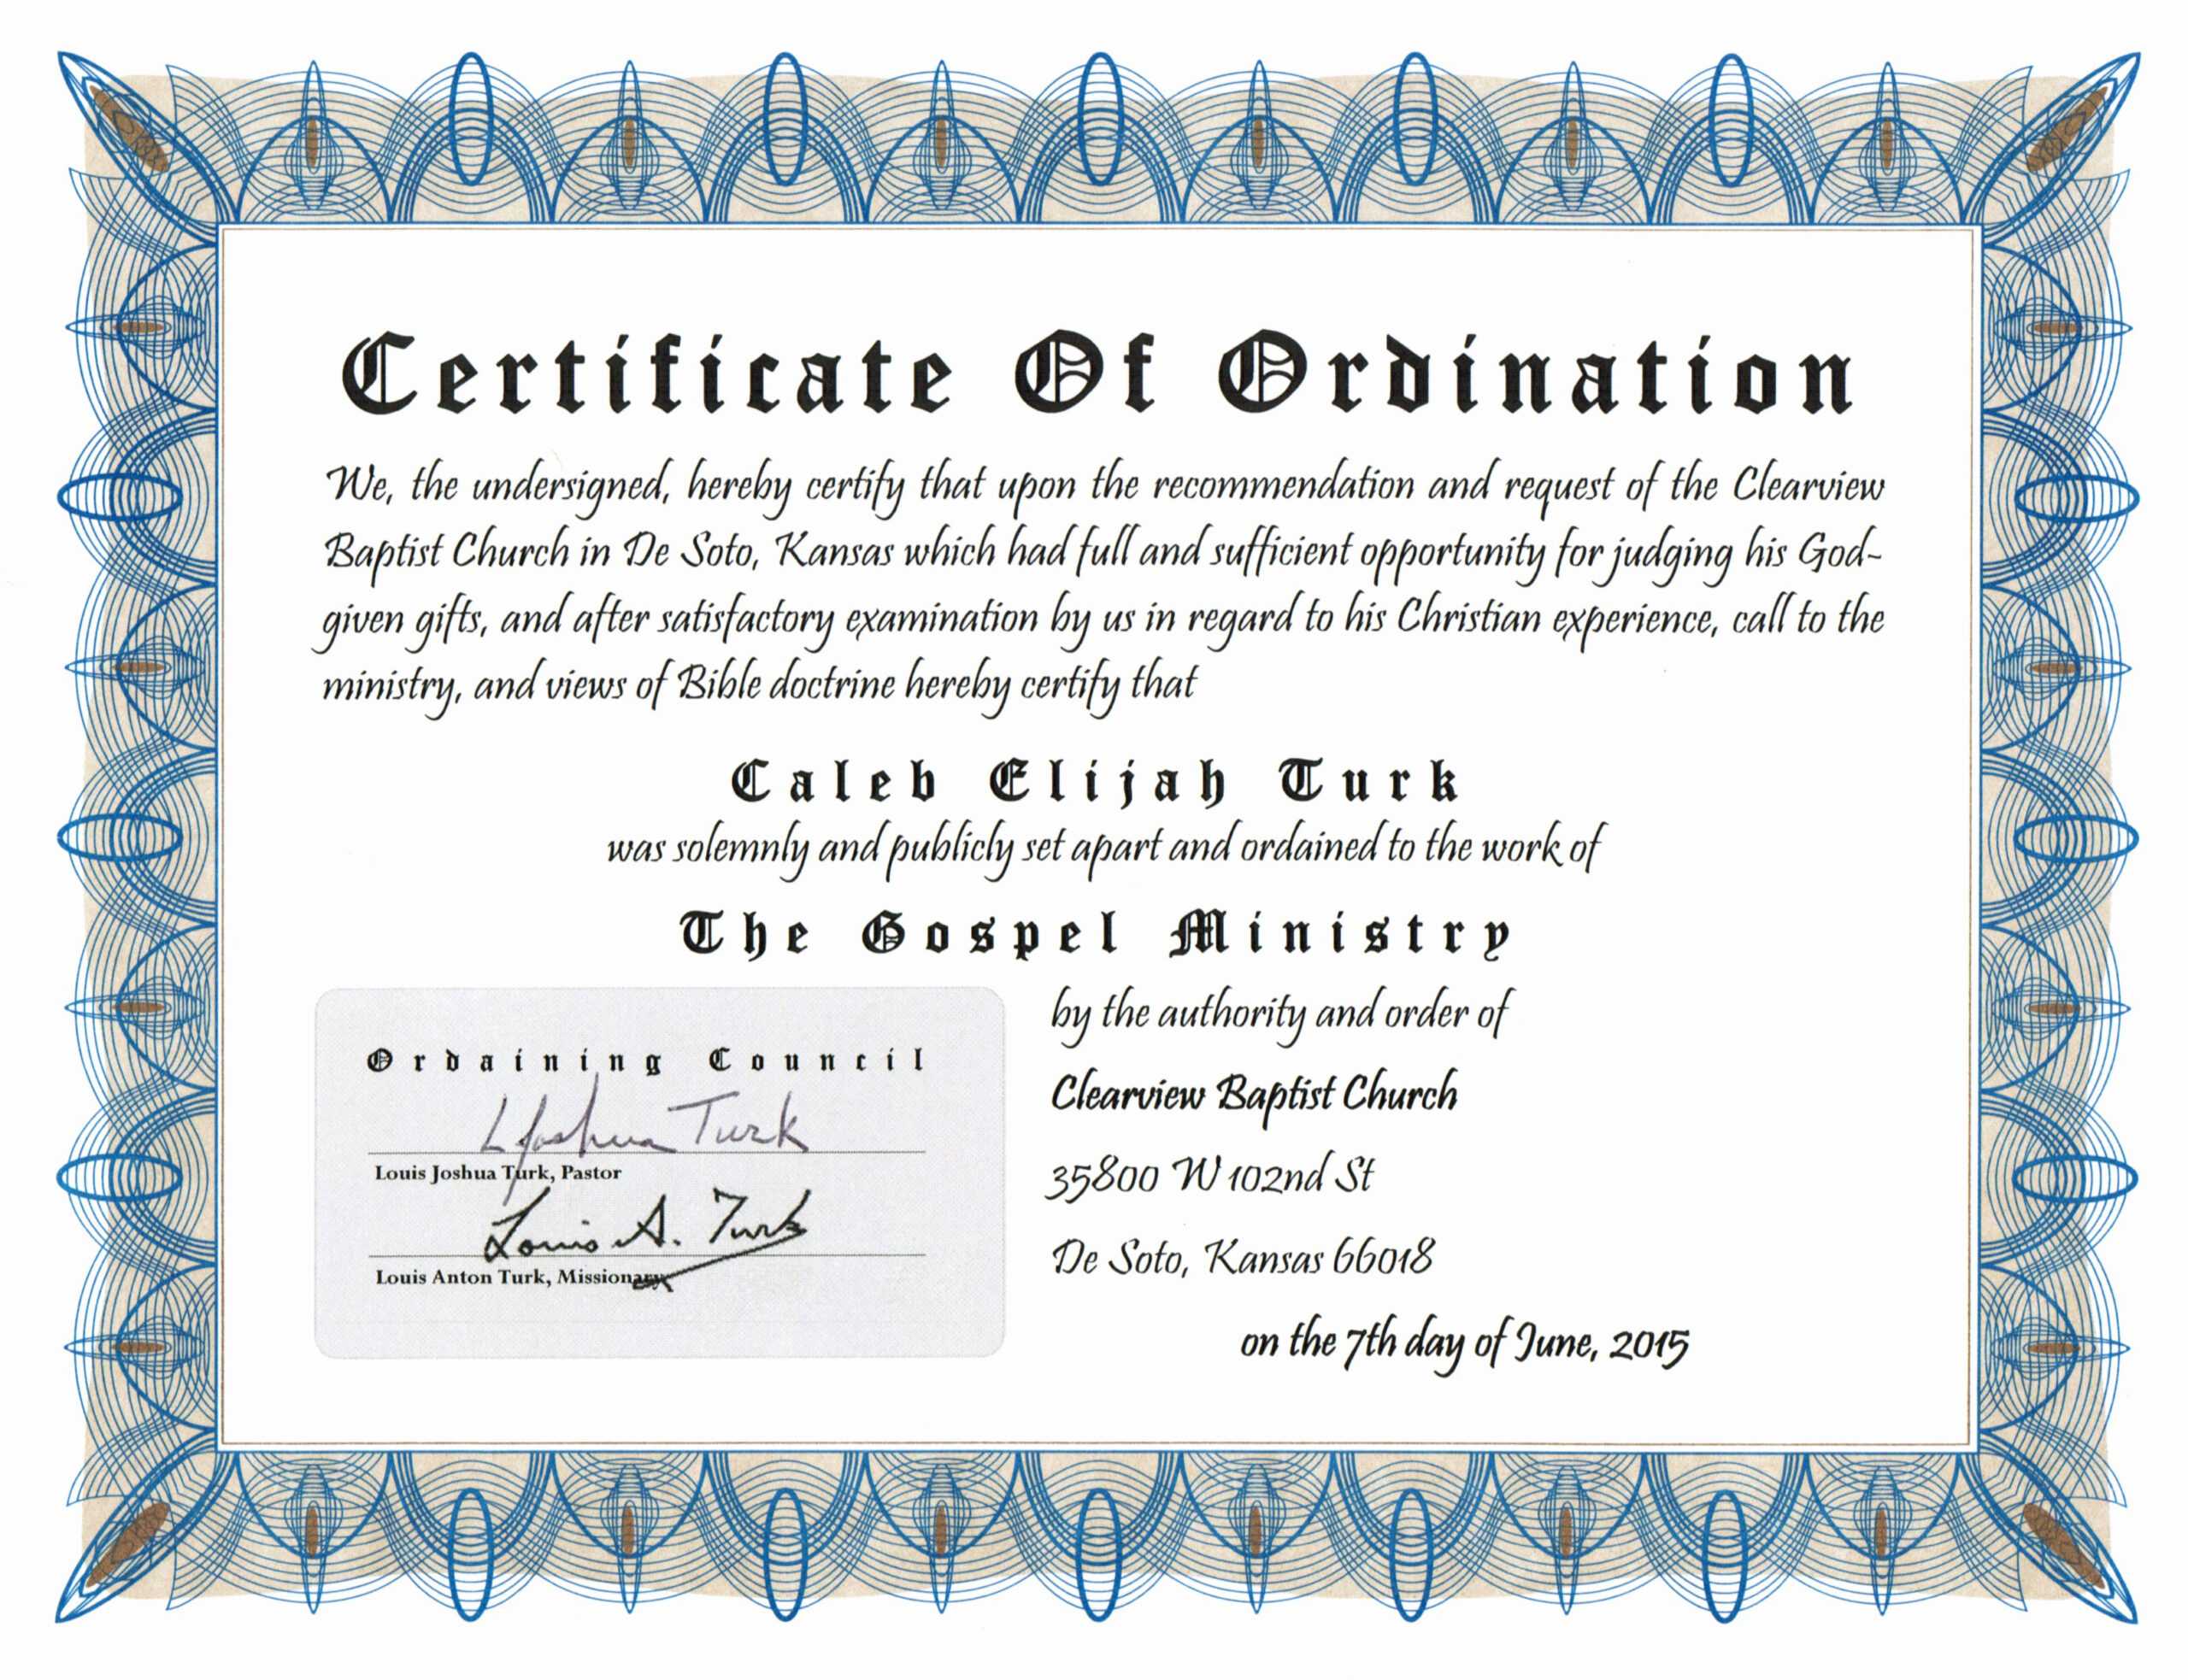 Certificate Of Ordination For Ministers Template